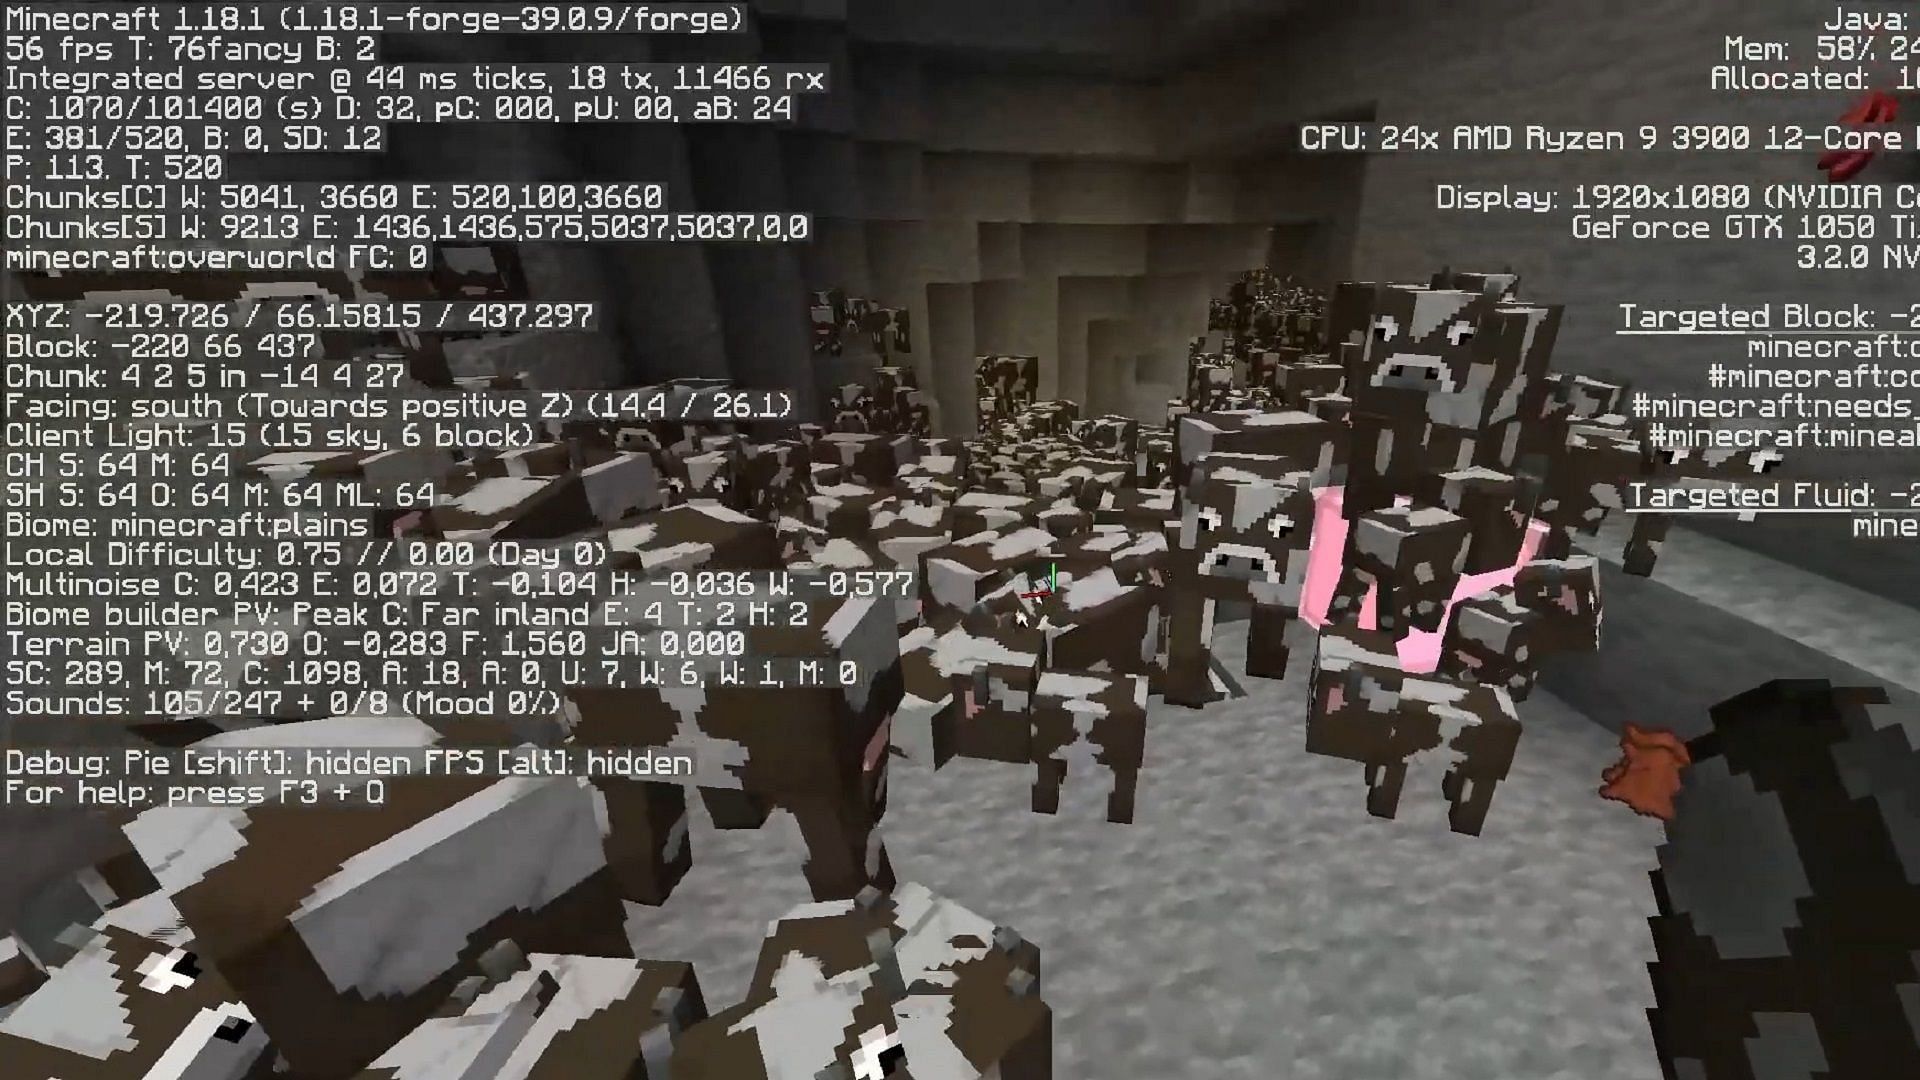 Entity Culling removes certain in-game entities like mobs in some circumstances to improve FPS (Image via Udisen/YouTube)